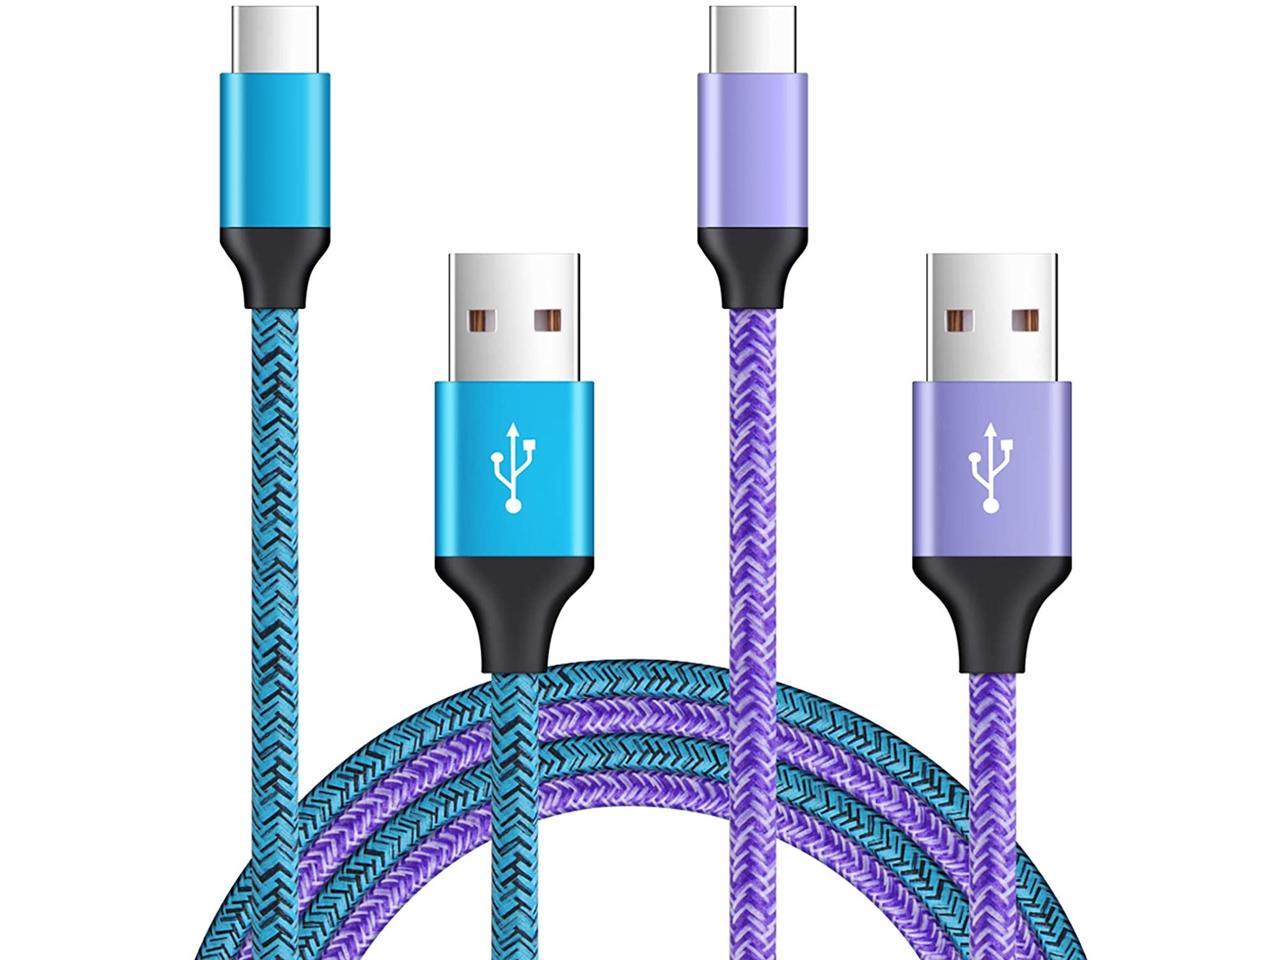 USB C Cable Pixel 3a 2,OnePlus 6T Moto G7/G6/X4/Z3/Z2 Play LG Stylo 4 G8 G7 ThinQ Q7+ V20 G6 G5 2-Pack 6ft AndHot Fast Charge Type C Charger Charging Cords Compatible with Samsung Galaxy S10 S9 S8